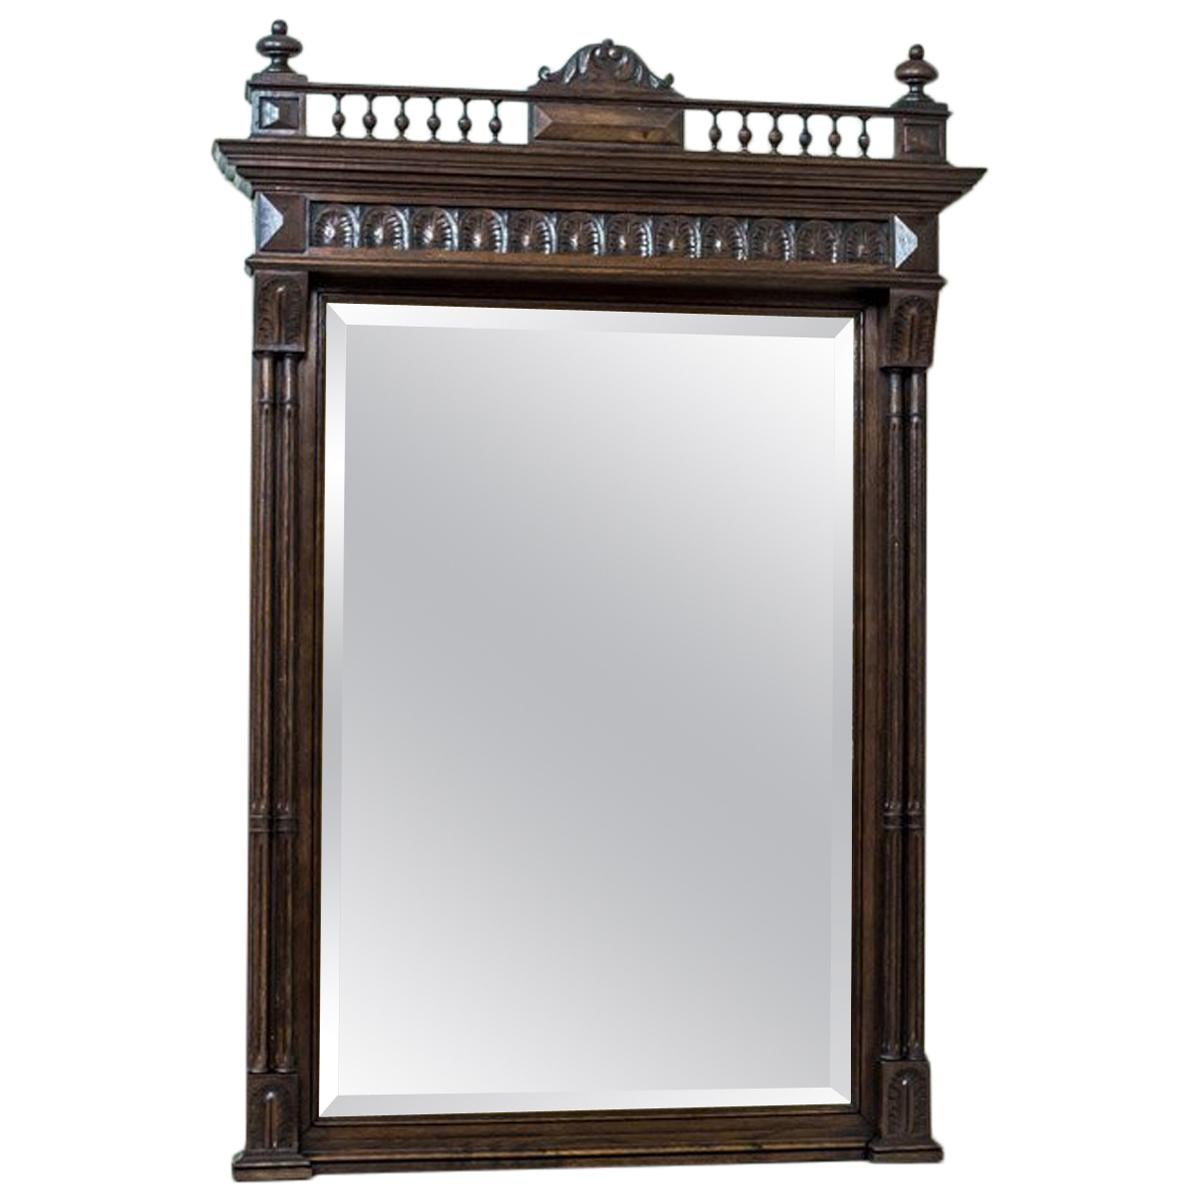 19th Century Pier Glass in an Eclectic, Oak Frame